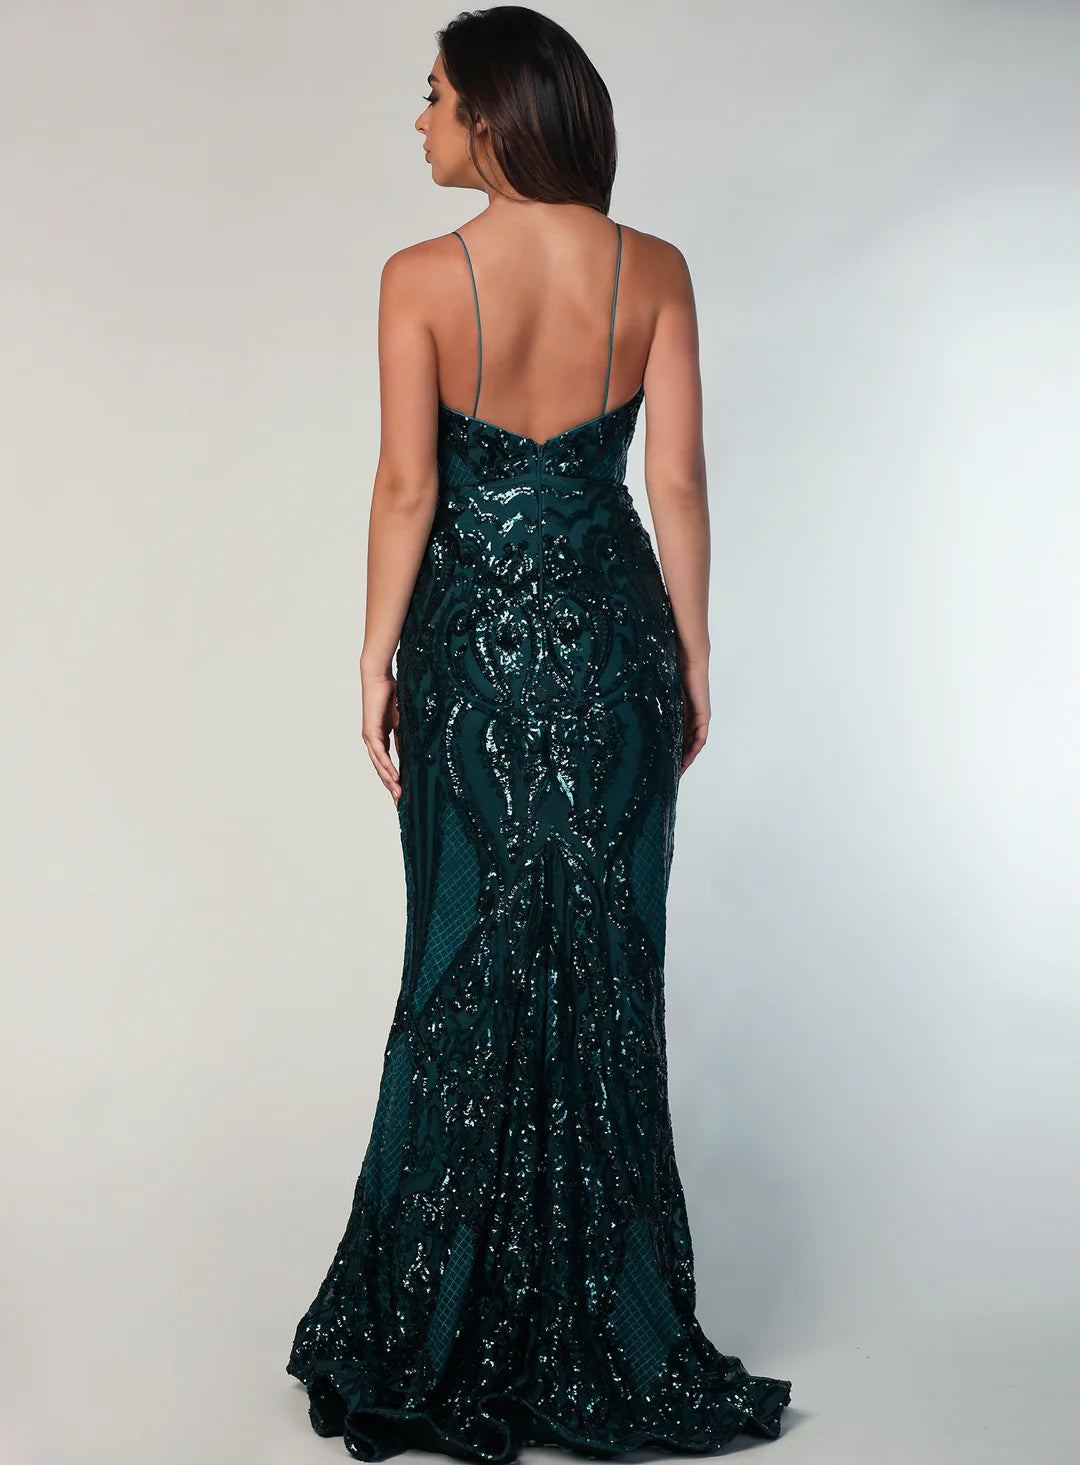 Tina Holly Delilah Gown Emerald